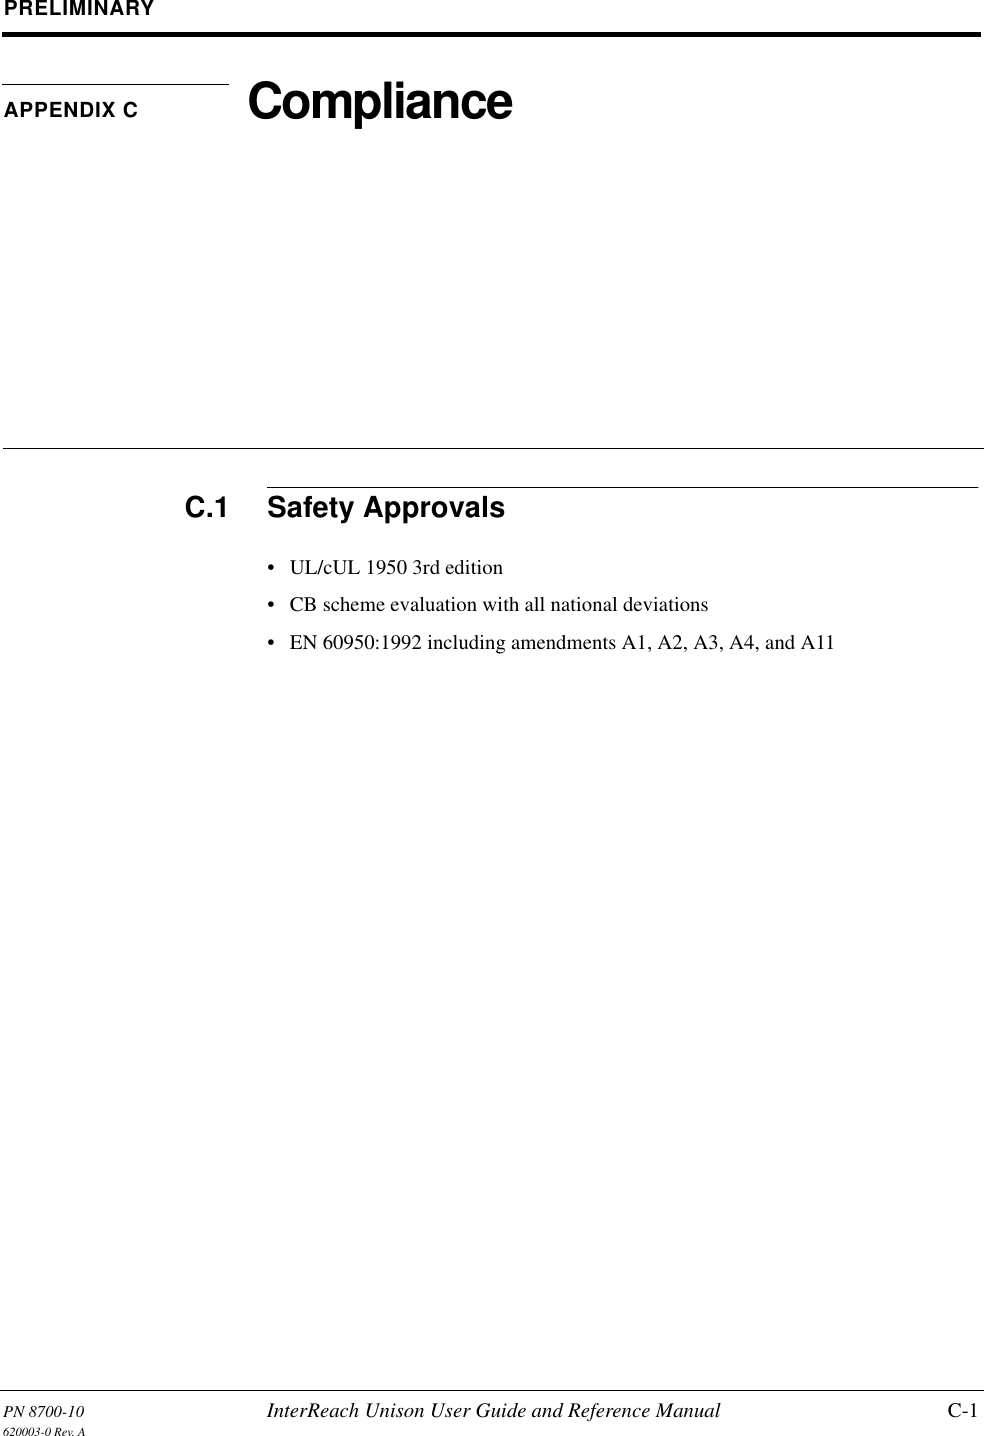 PN 8700-10 InterReach Unison User Guide and Reference Manual C-1620003-0 Rev. APRELIMINARYAPPENDIX C ComplianceC.1 Safety Approvals• UL/cUL 1950 3rd edition• CB scheme evaluation with all national deviations• EN 60950:1992 including amendments A1, A2, A3, A4, and A11